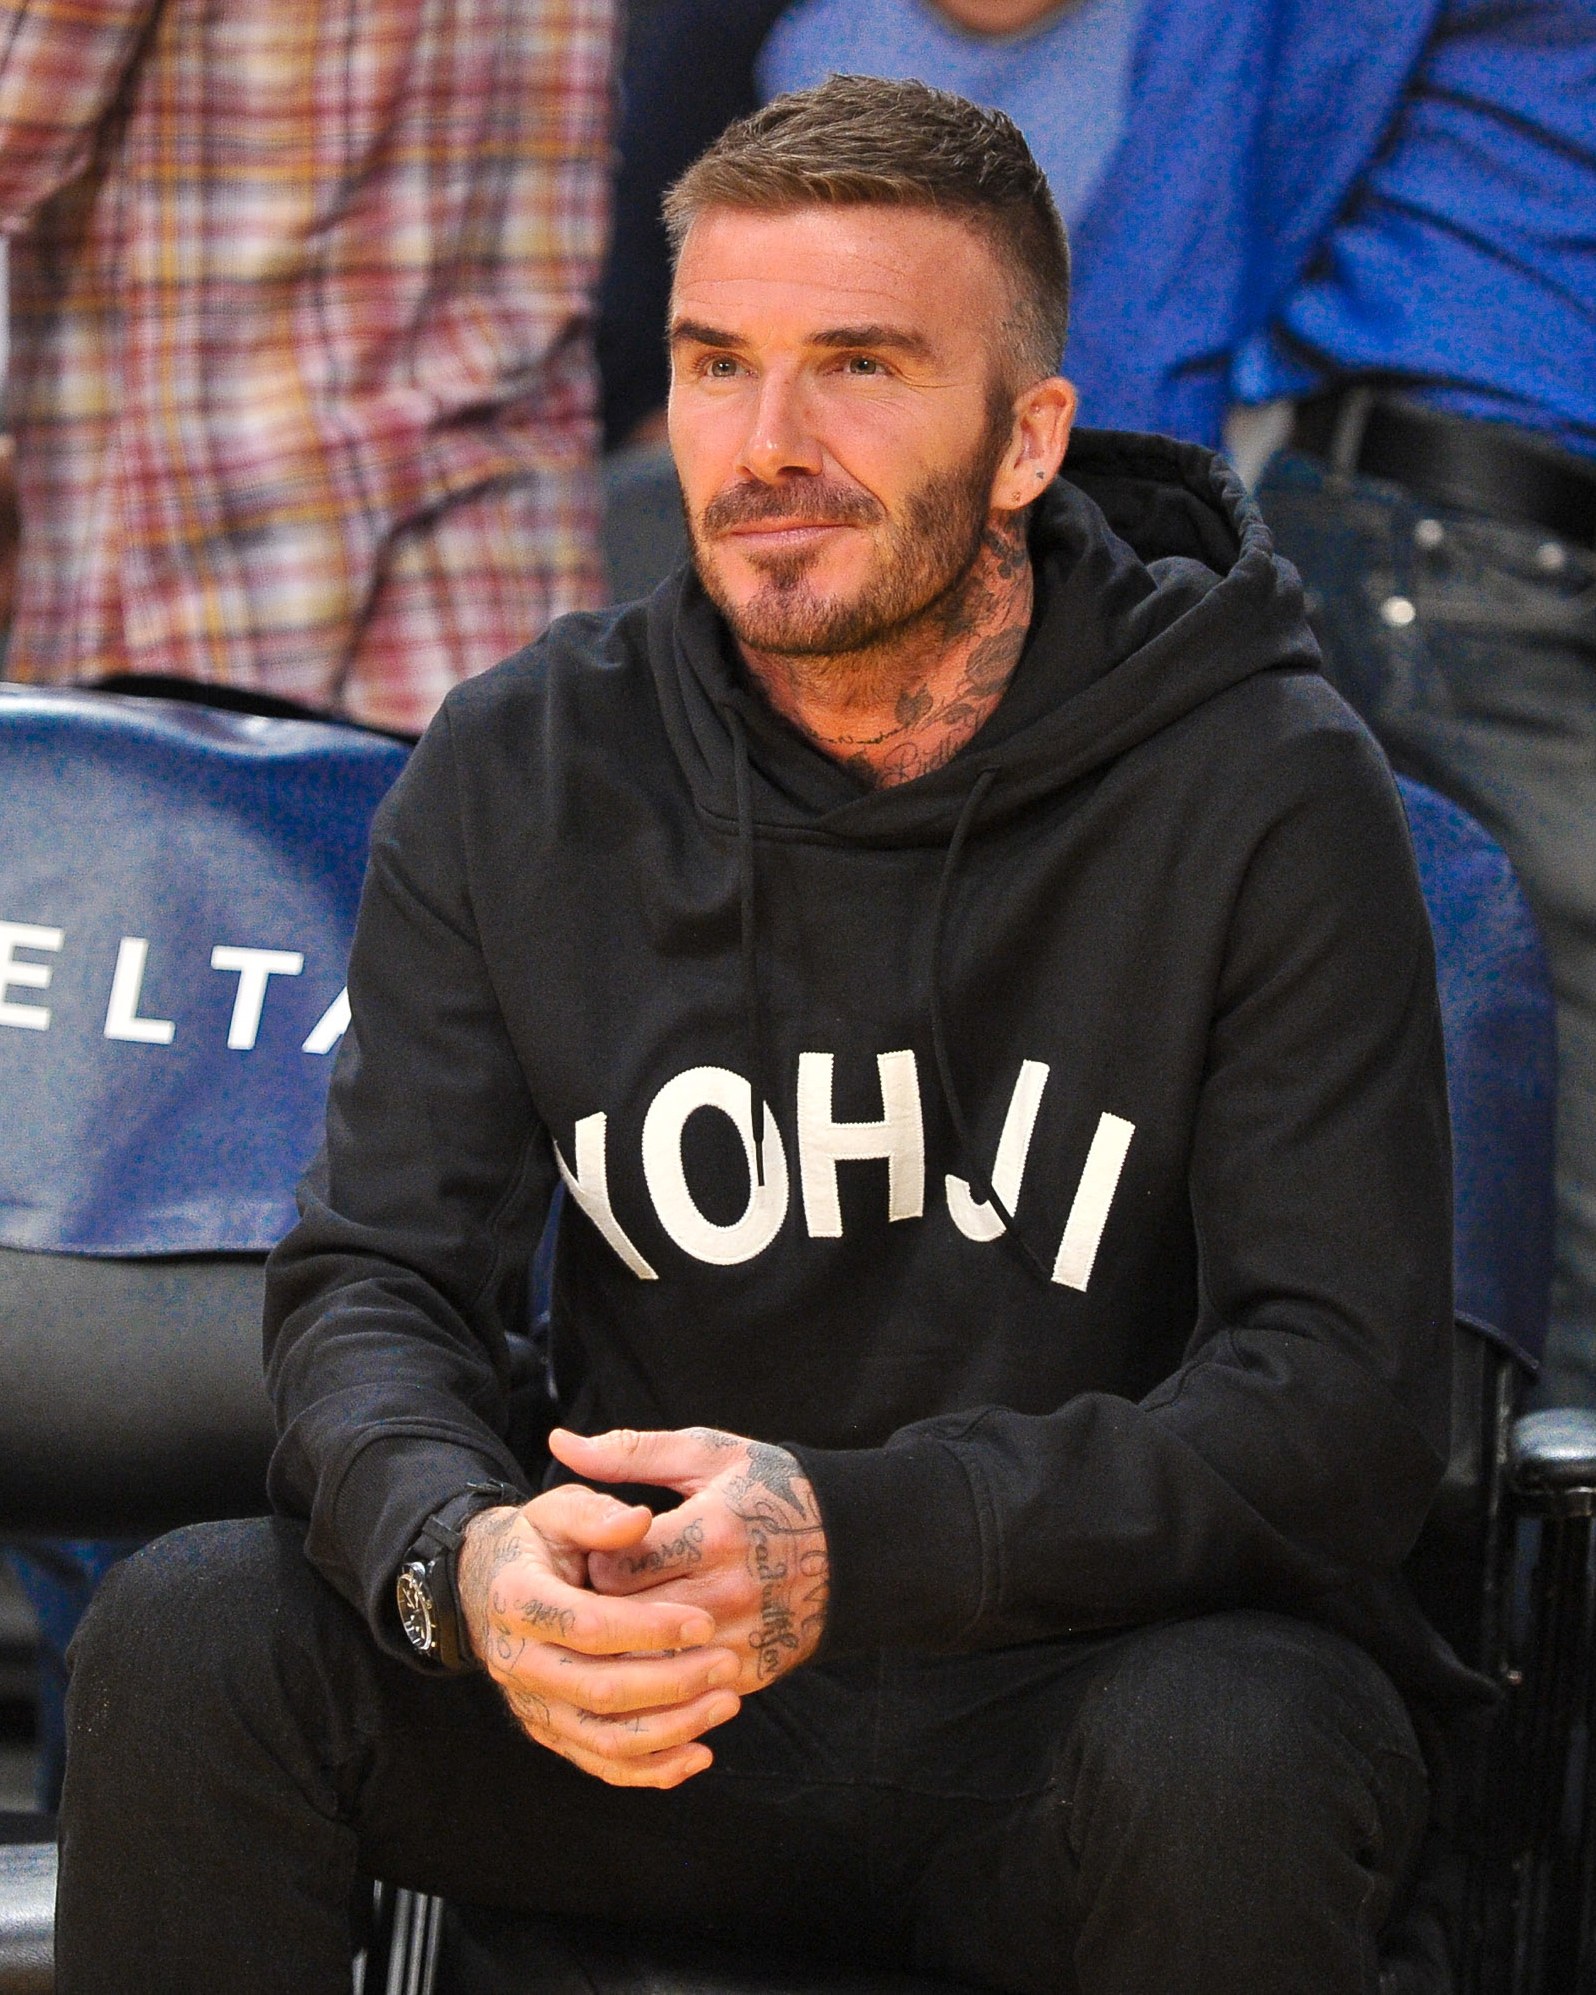 David Beckham Gives You a Masterclass in Relaxed Suiting - GQ